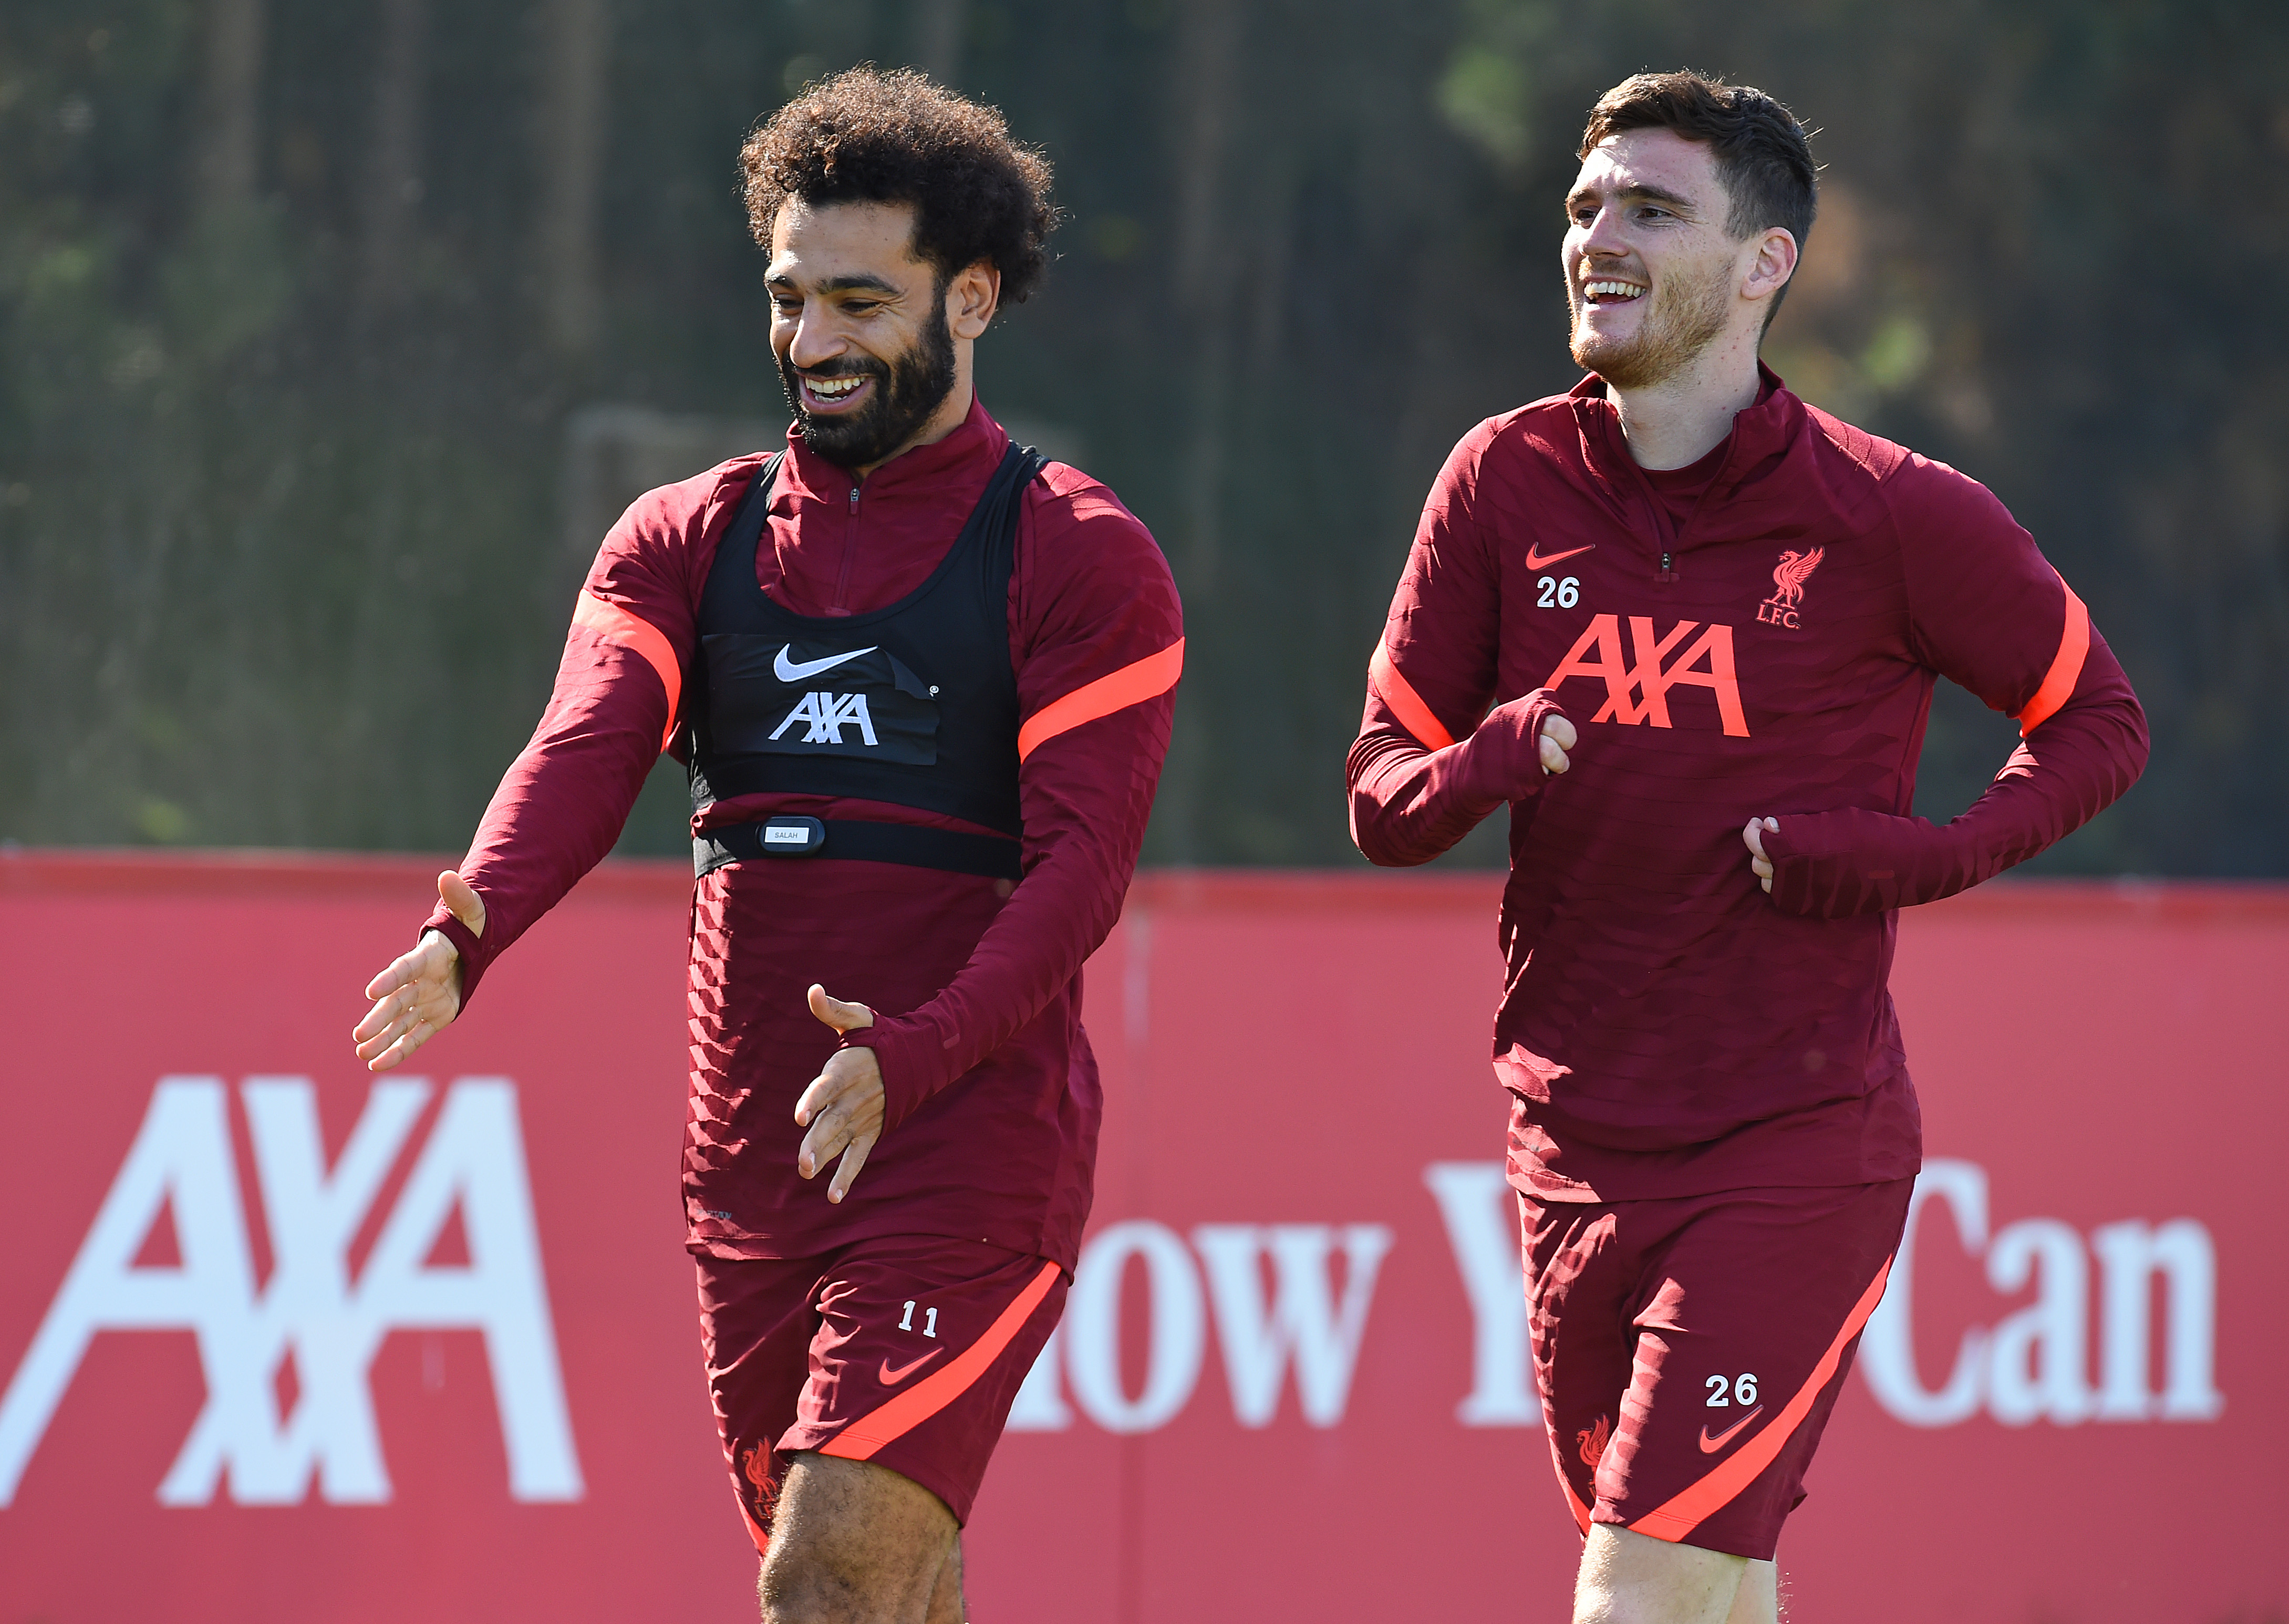 Mohamed Salah and Andy Robertson are all smiles during a training session on September 16, 2021 in Kirkby, England.